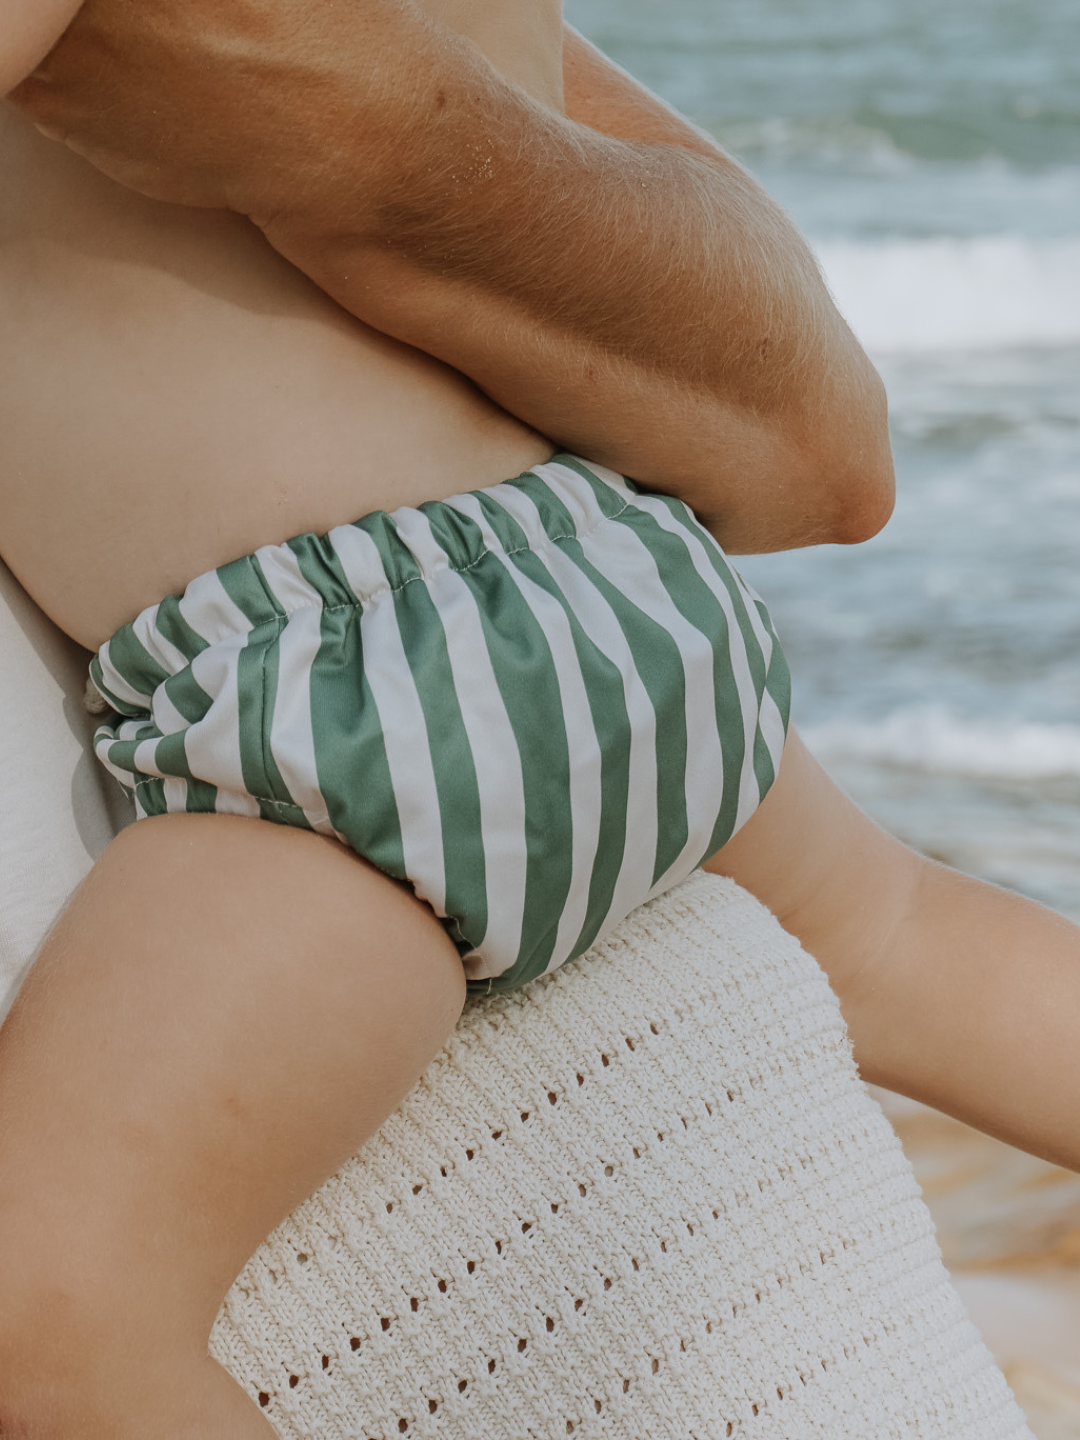 The back view of the swim diaper with an elastic waist with a tie and elastic leg holes on a child being held by their parent at the beach. The diaper is a has cream and moss green vertical stripes.